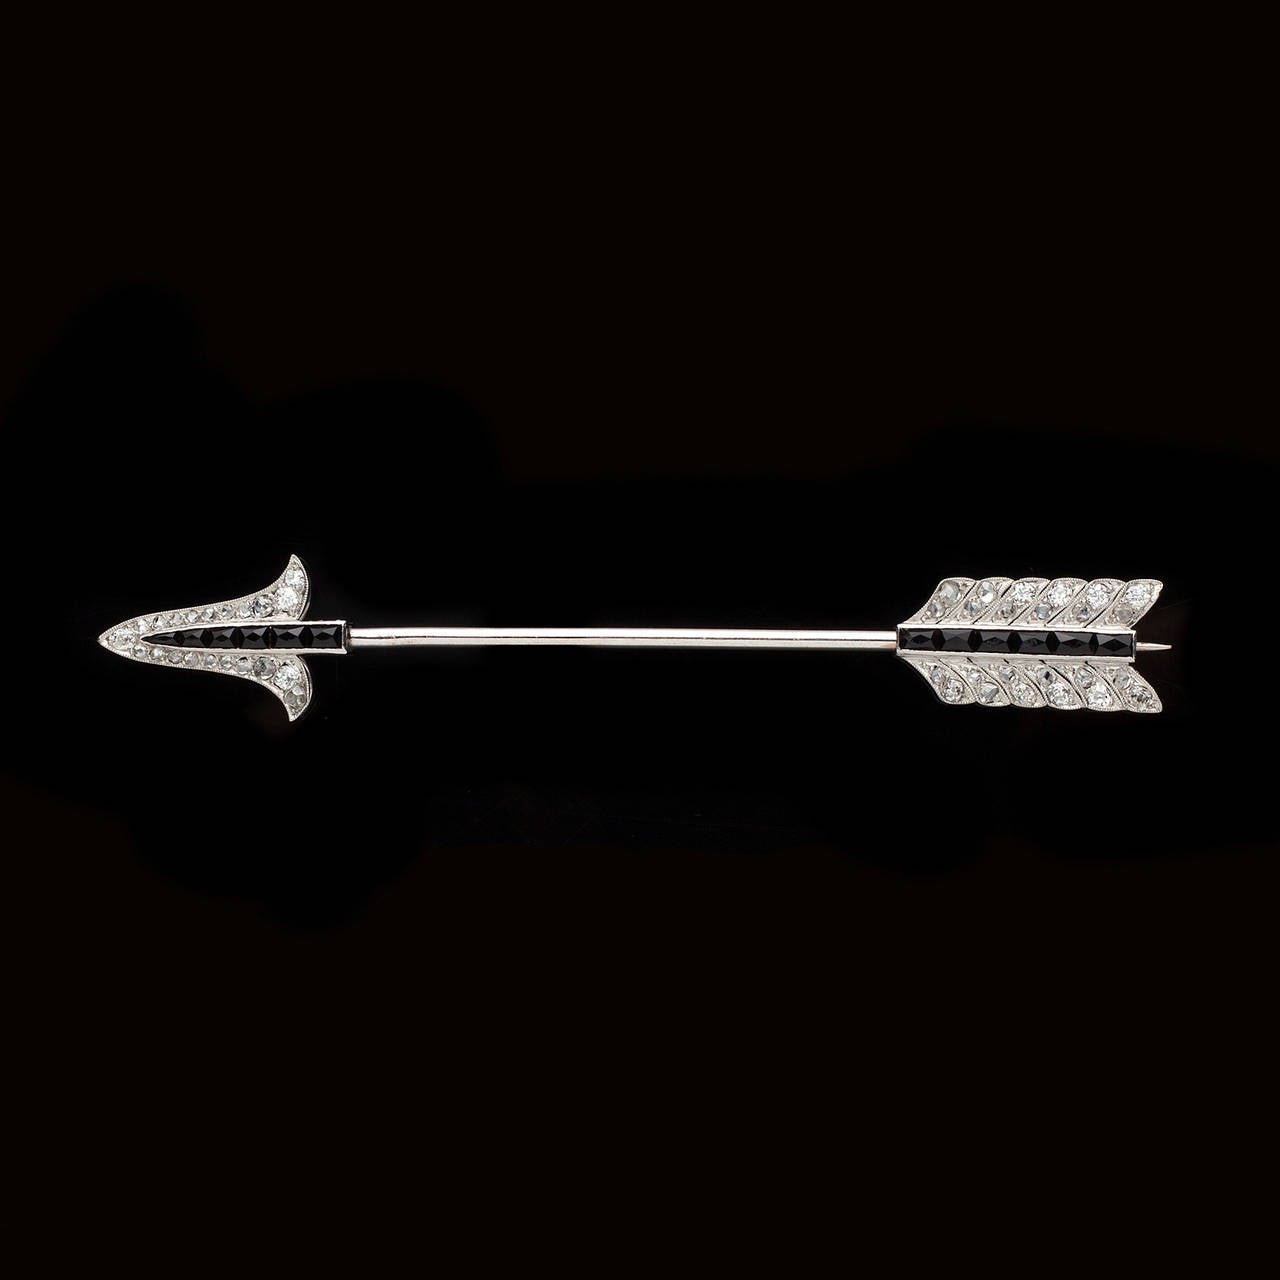 French Art Deco J.E. Caldwell Jabot Pin Features 1.00ct of Old Mine and Rose Cut Diamonds Along with a Row of Black Sapphires Accenting a Sophisticated Platinum Arrow. The 3 inch long pin totals 8.9 grams.